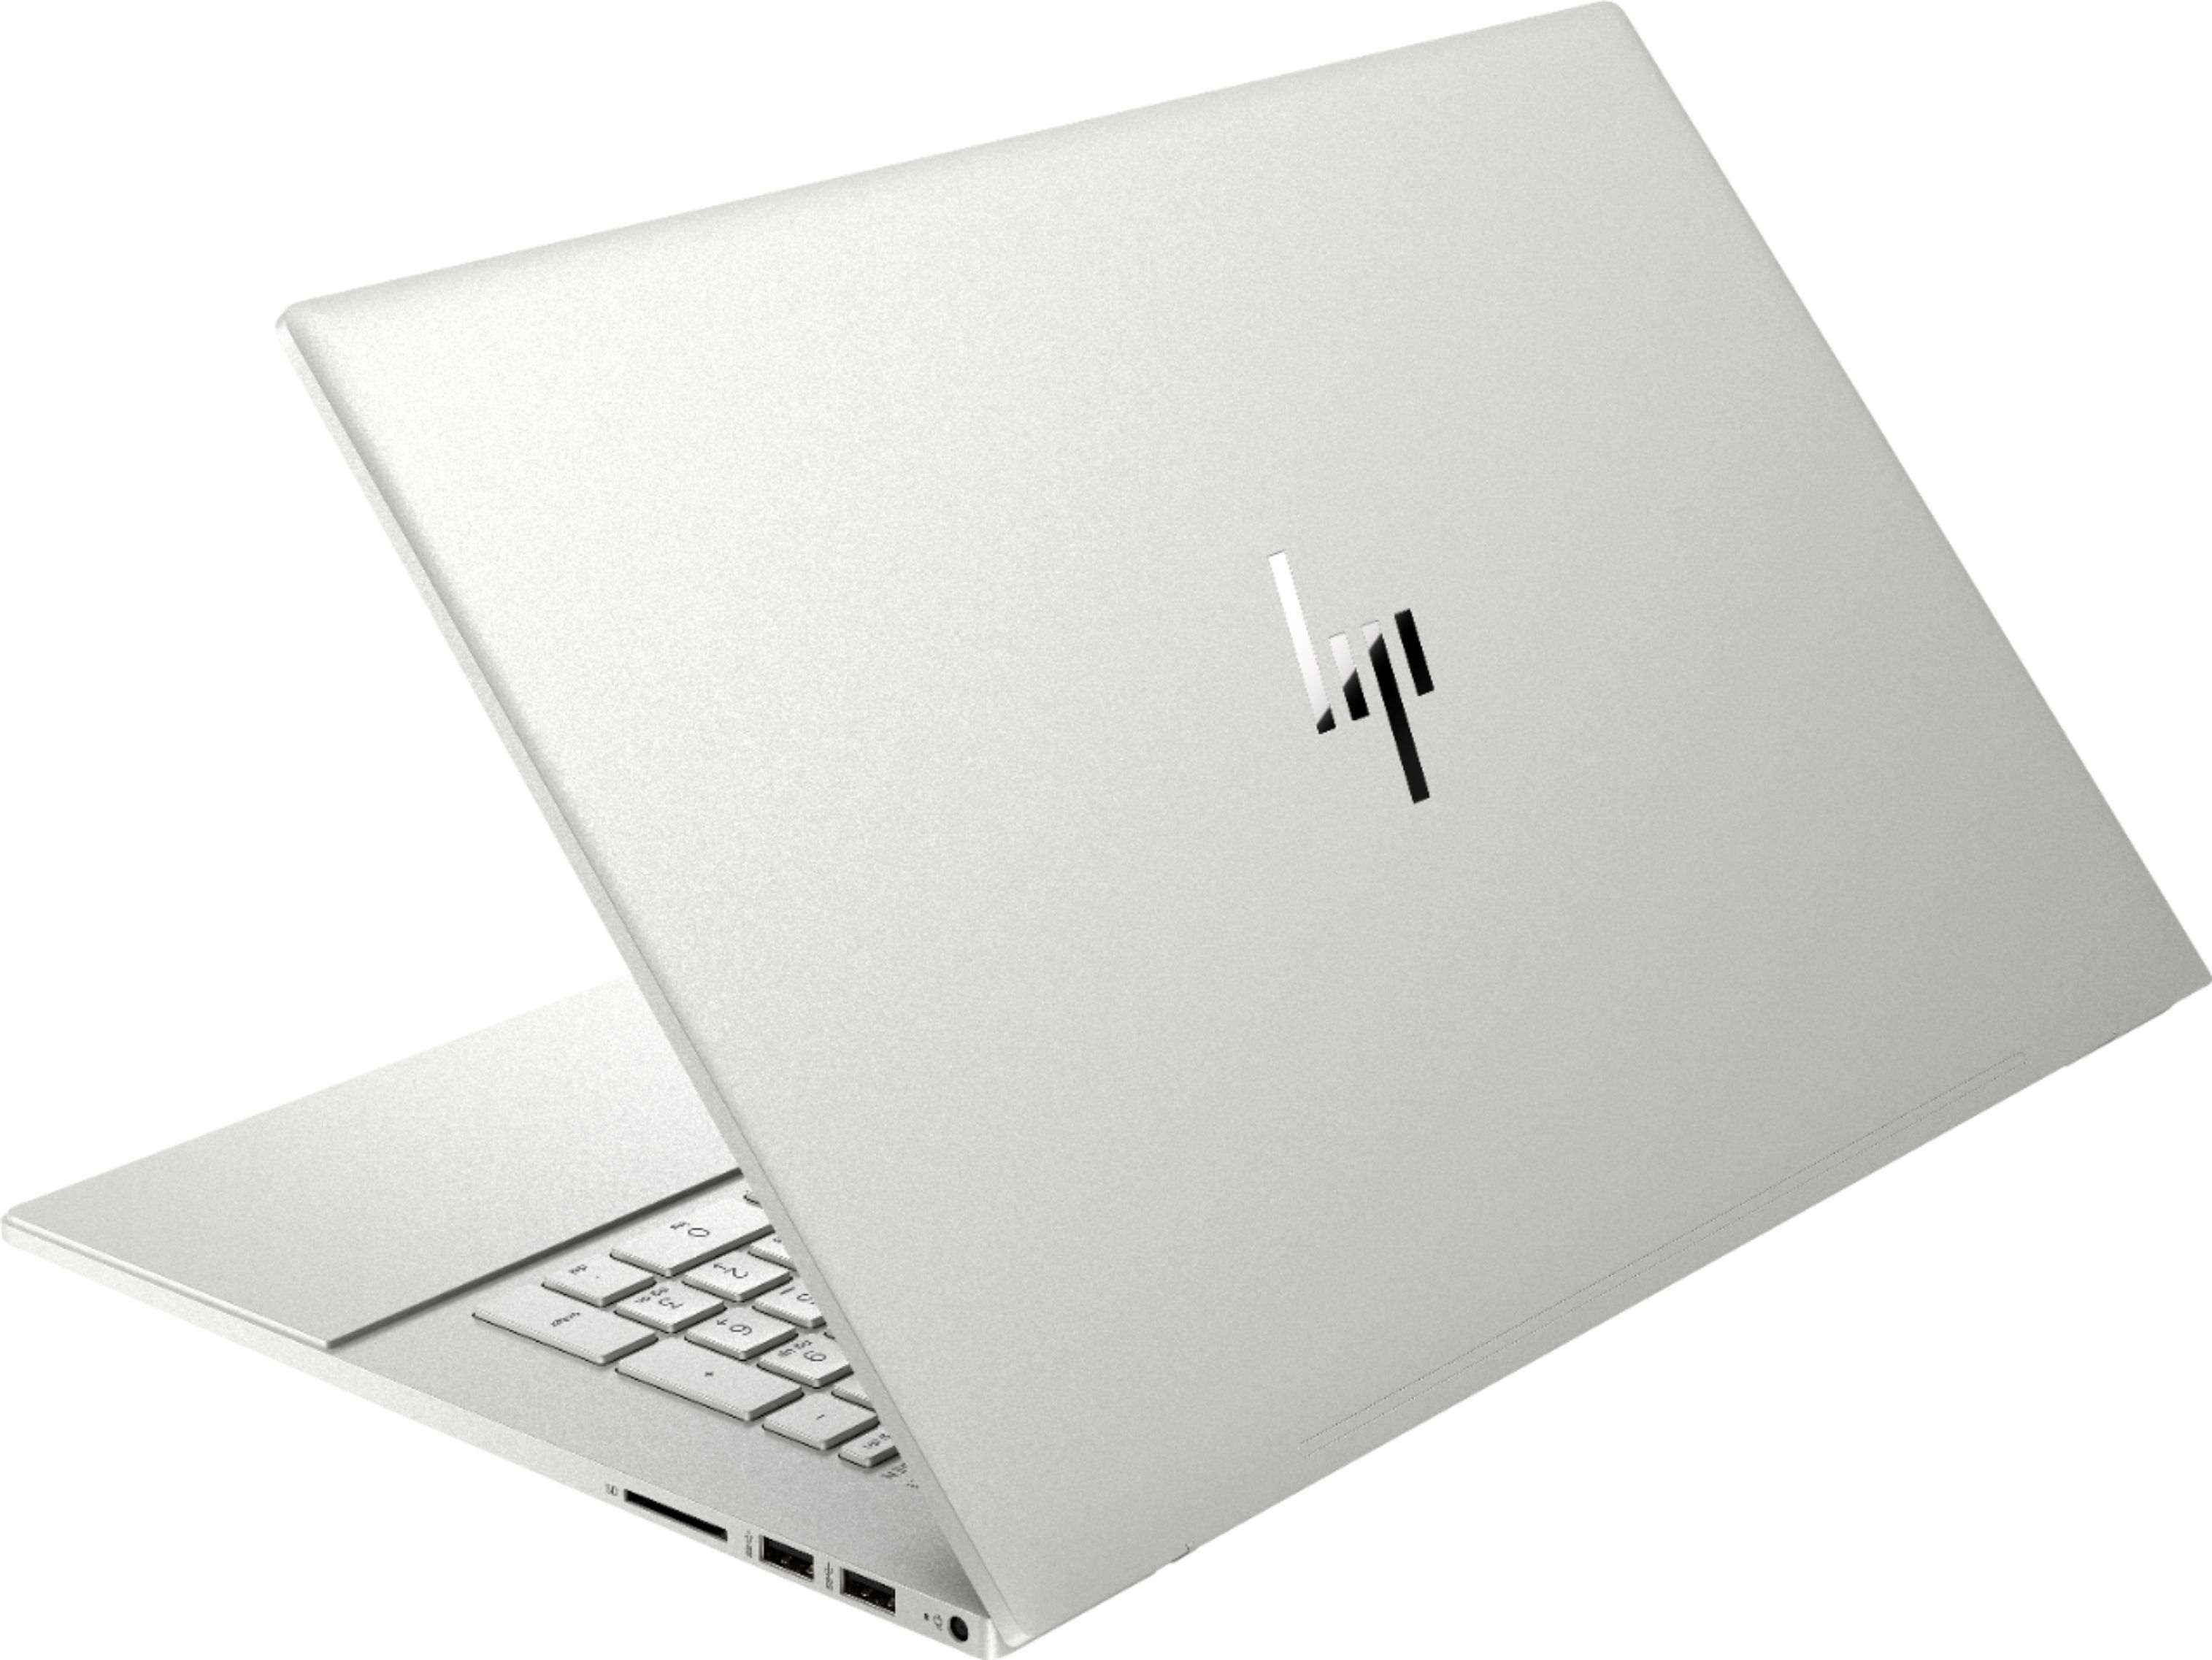 Questions and Answers: HP ENVY 17.3